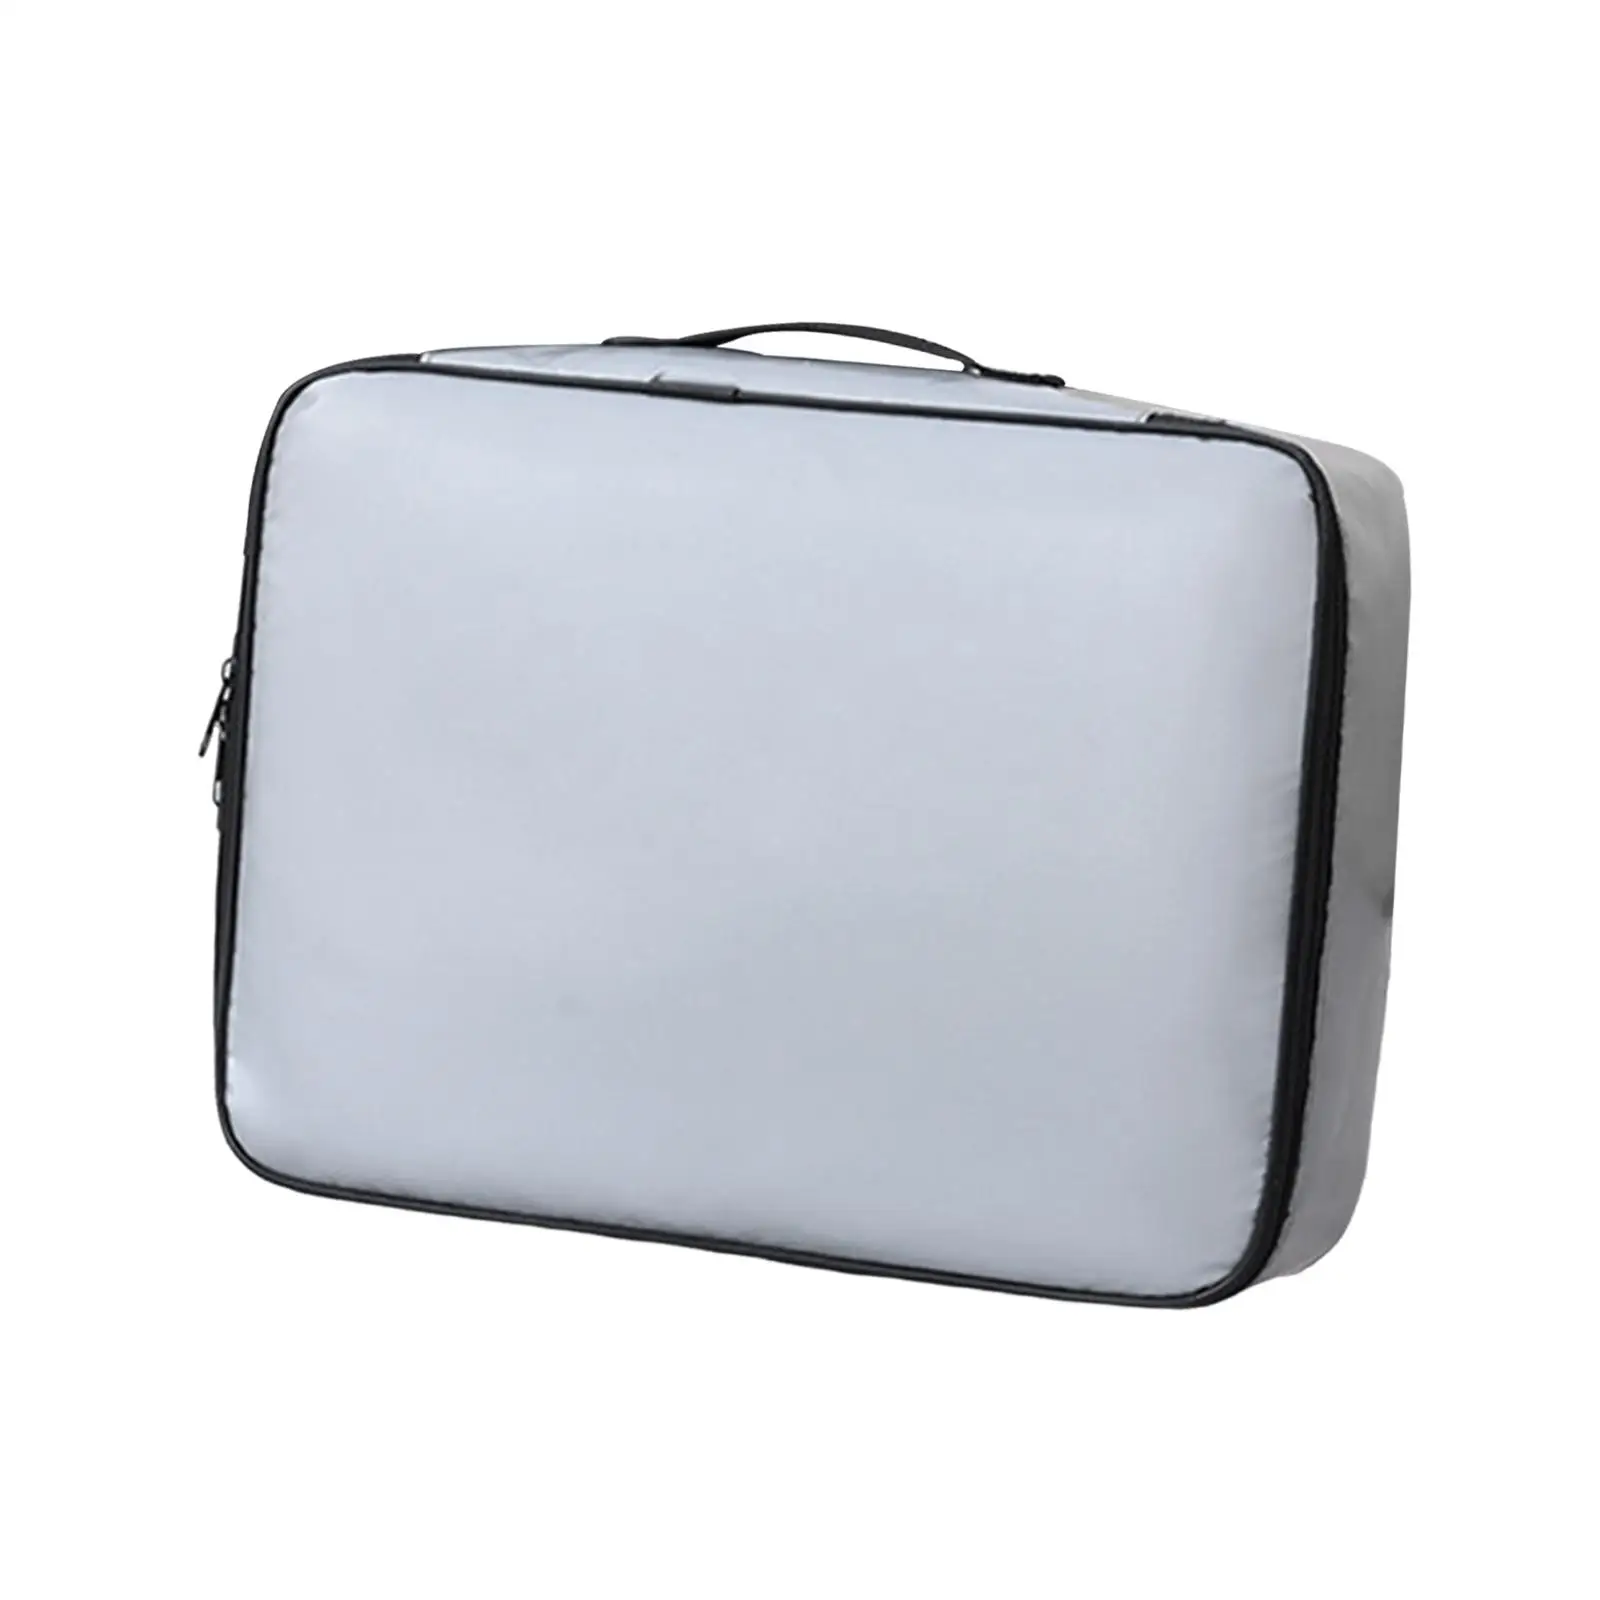 Fireproof Document Bag Document Organizer for Travel Home Storage Cabinet